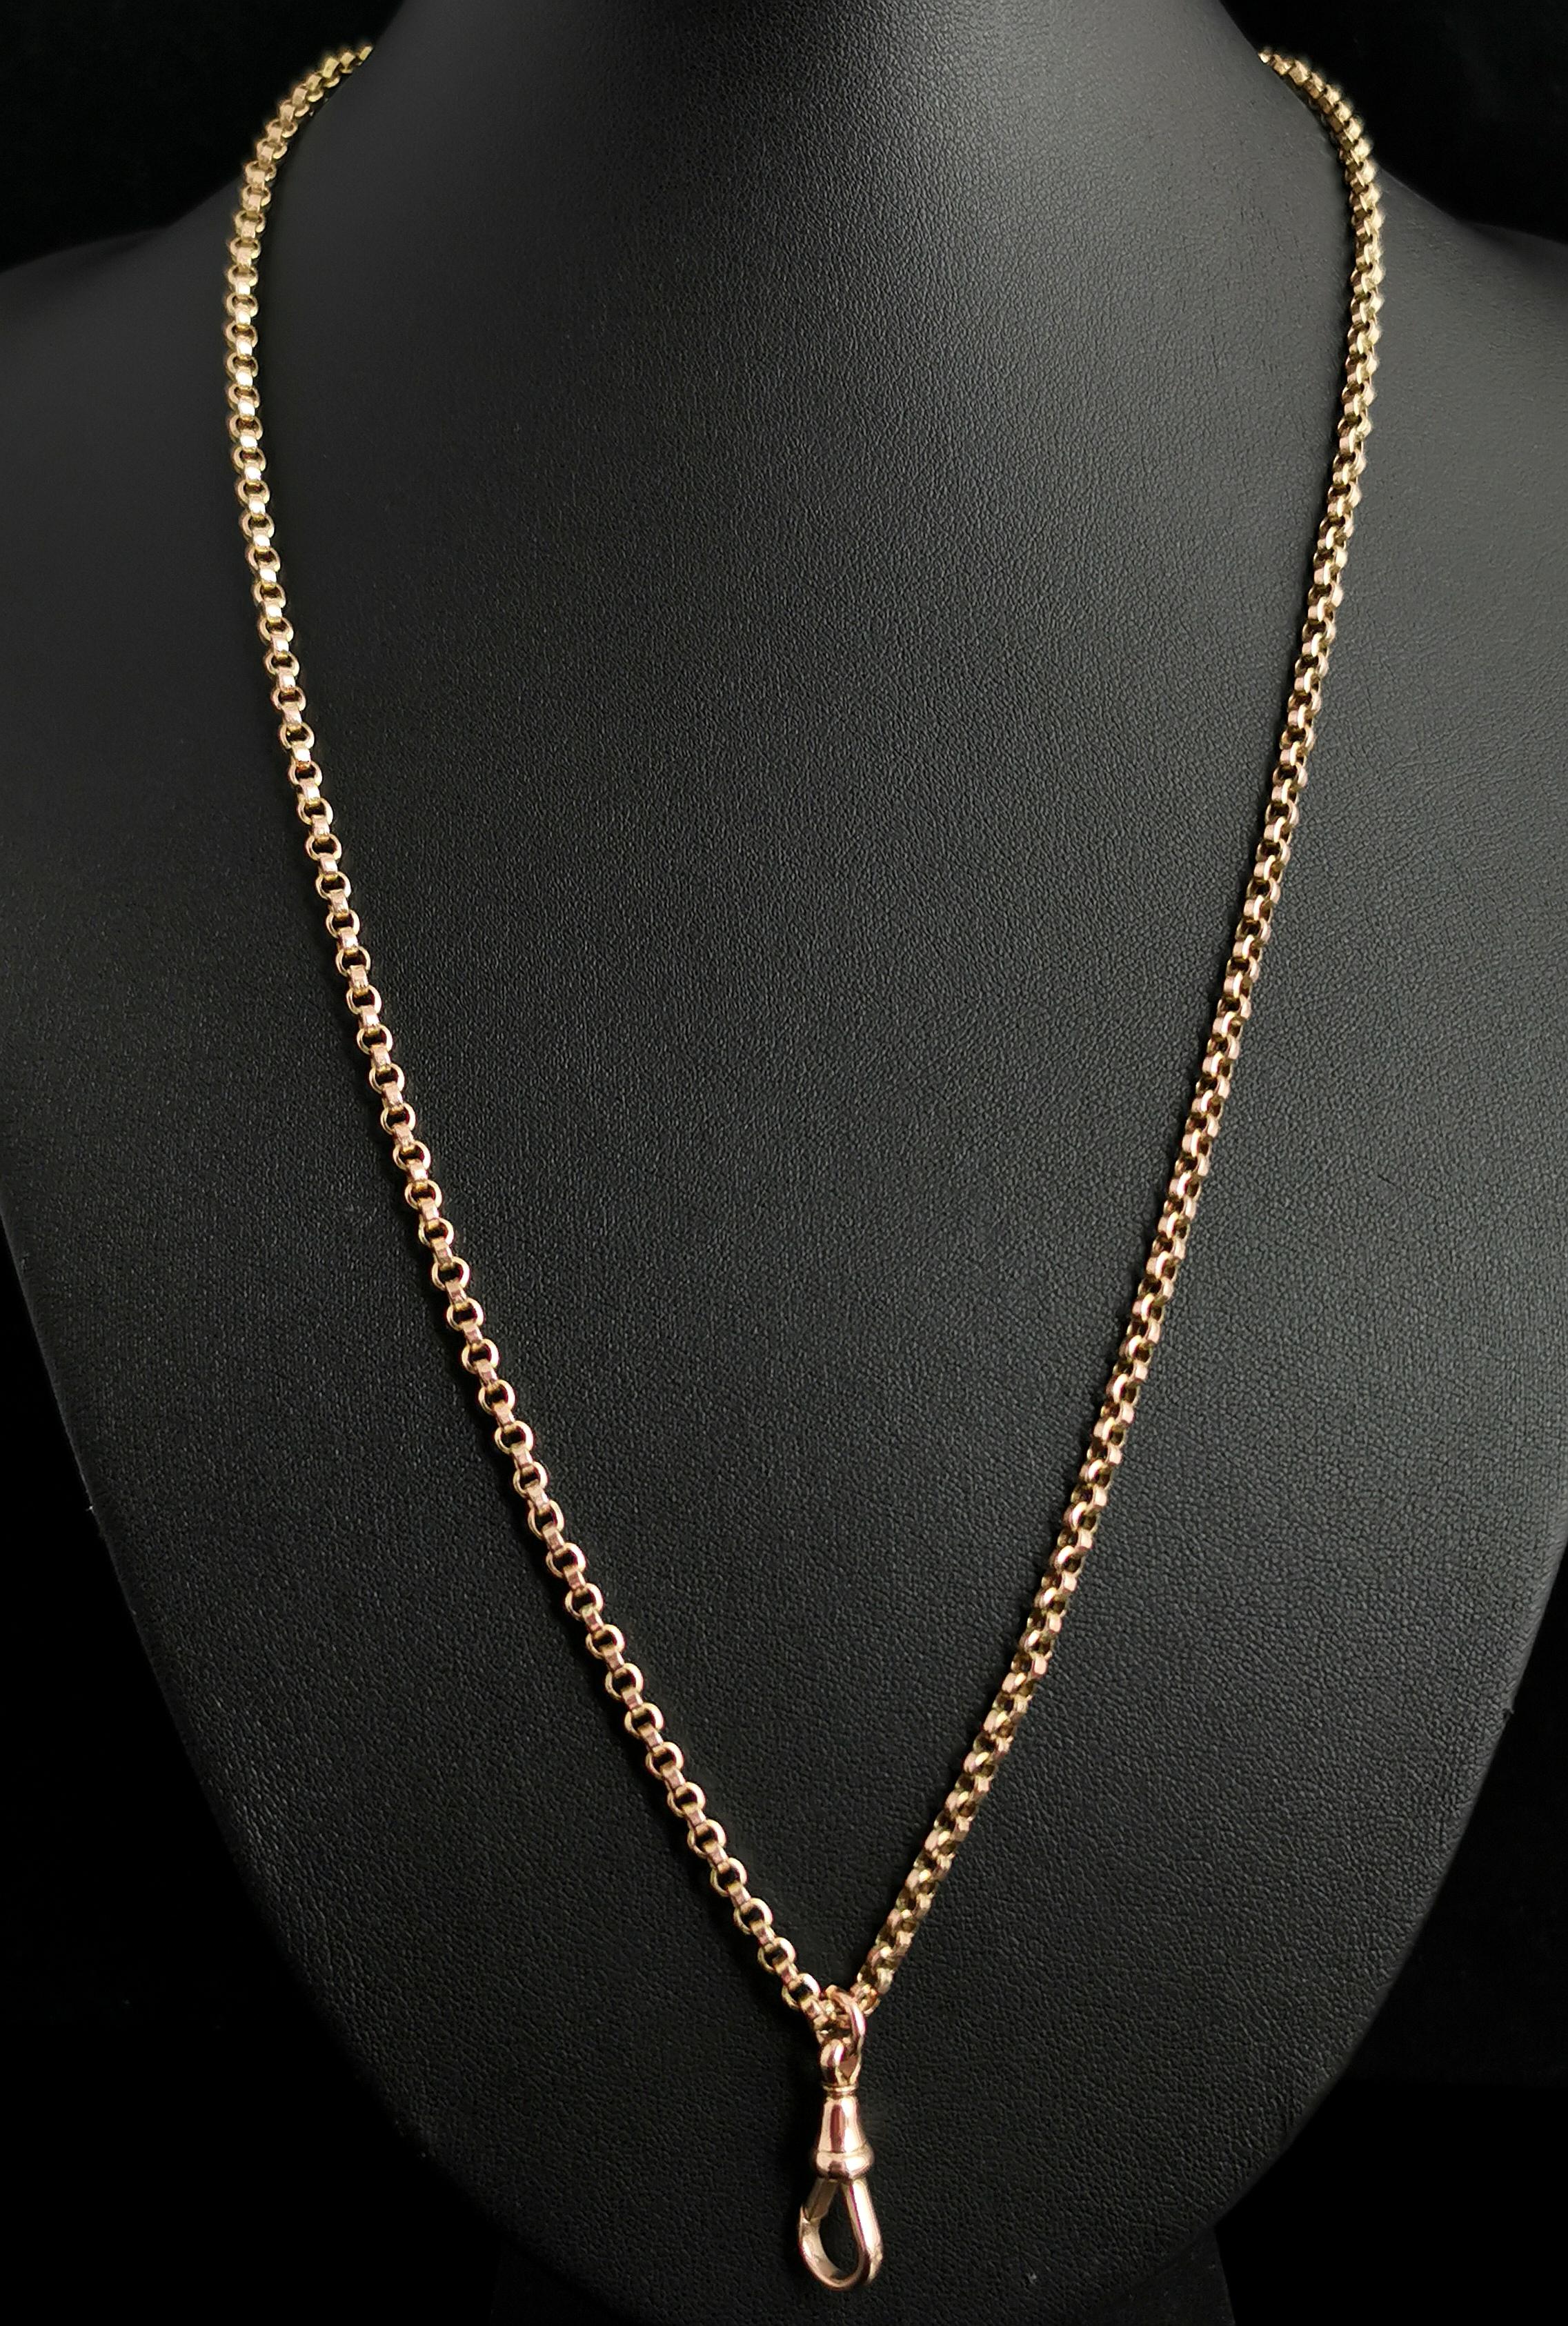 A stunning antique, late Victorian 9kt yellow gold rolo link chain necklace.

You can never really get enough of Antique gold chains, available in so many styles and lengths, they are the perfect piece for gifting and a staple of all antique jewelry